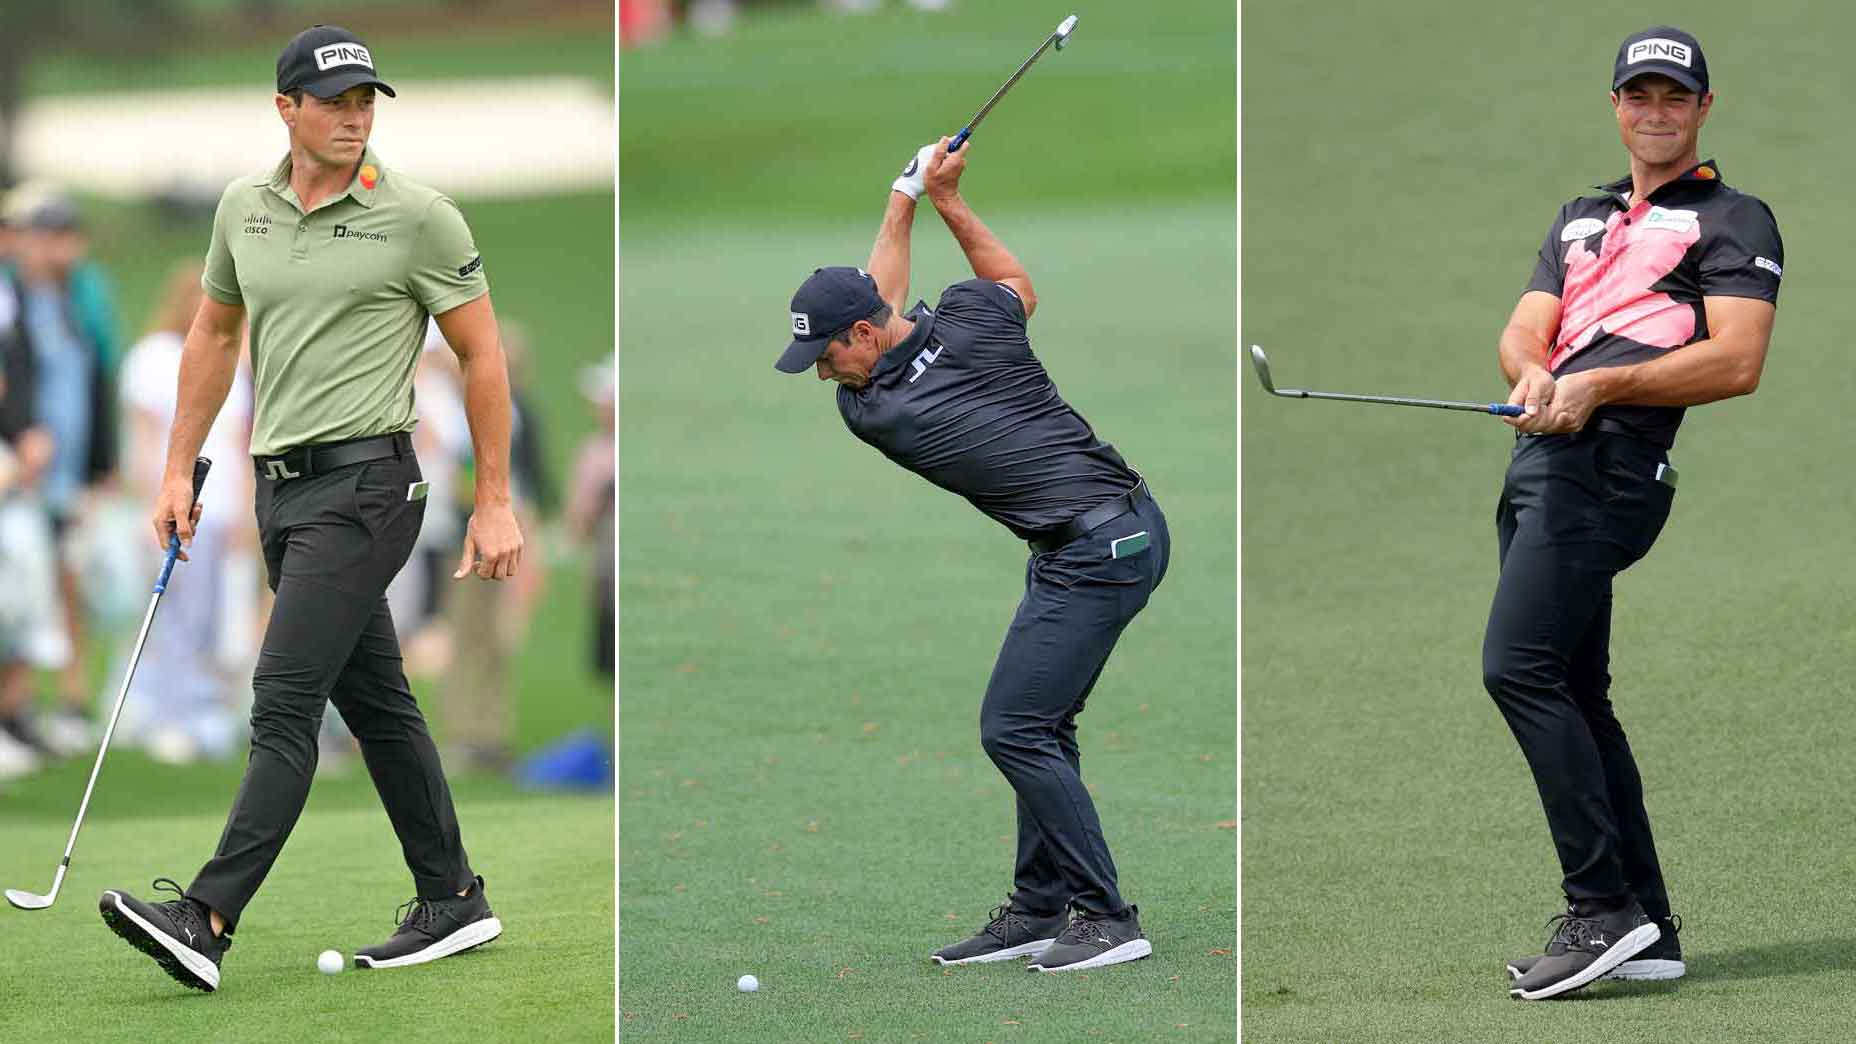 You can snag Viktor Hovland's cool Puma shoes at the Masters for a big discount.